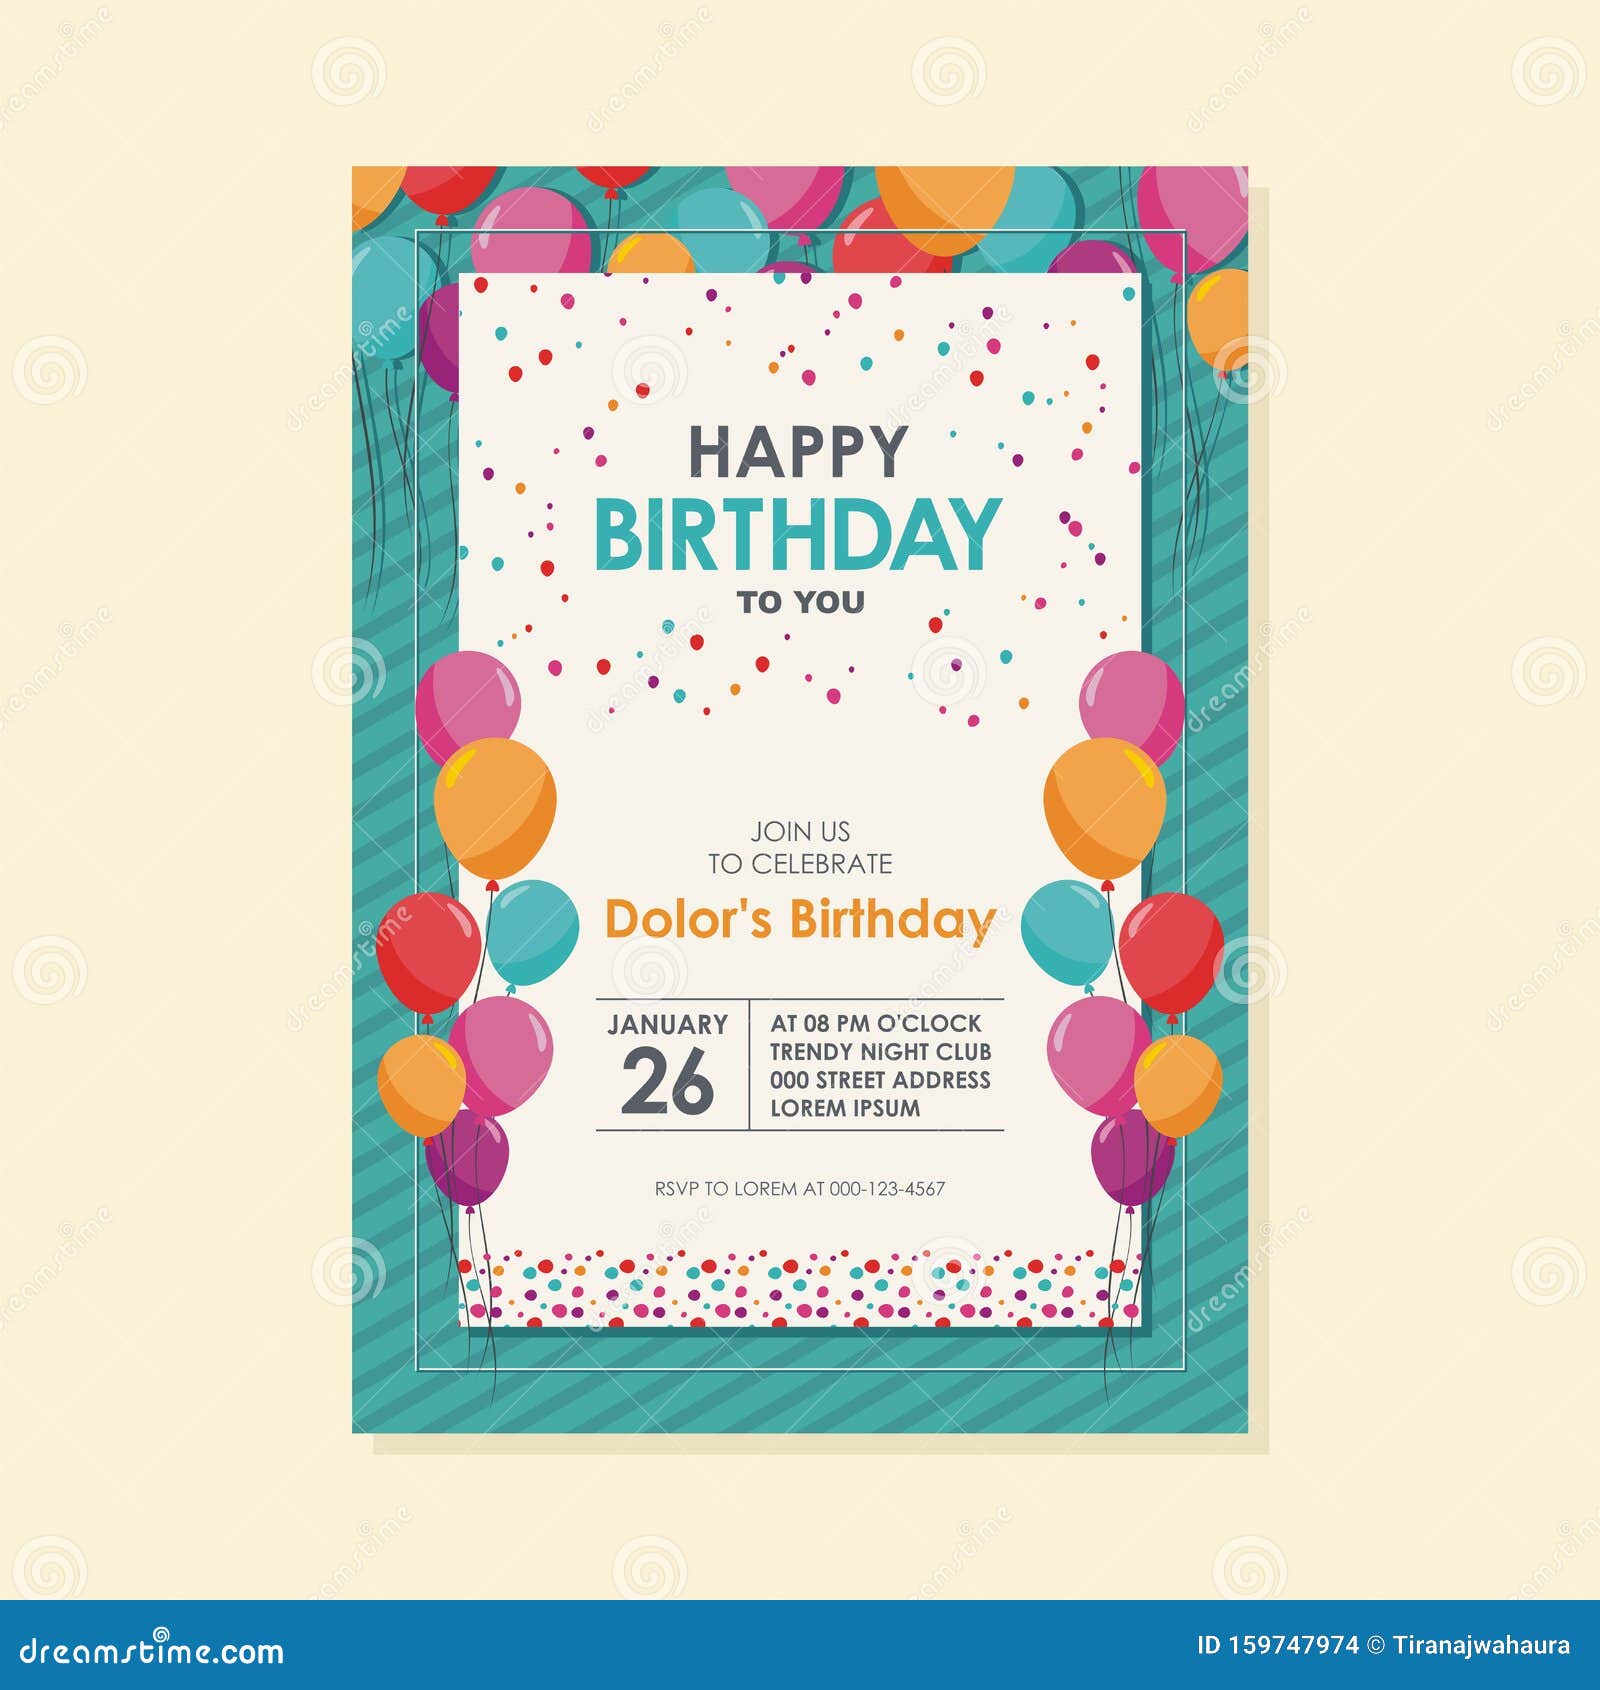 Happy Birthday Card Template Design With Trendy And Cute Design Stock Vector Illustration Of Decorative Birth